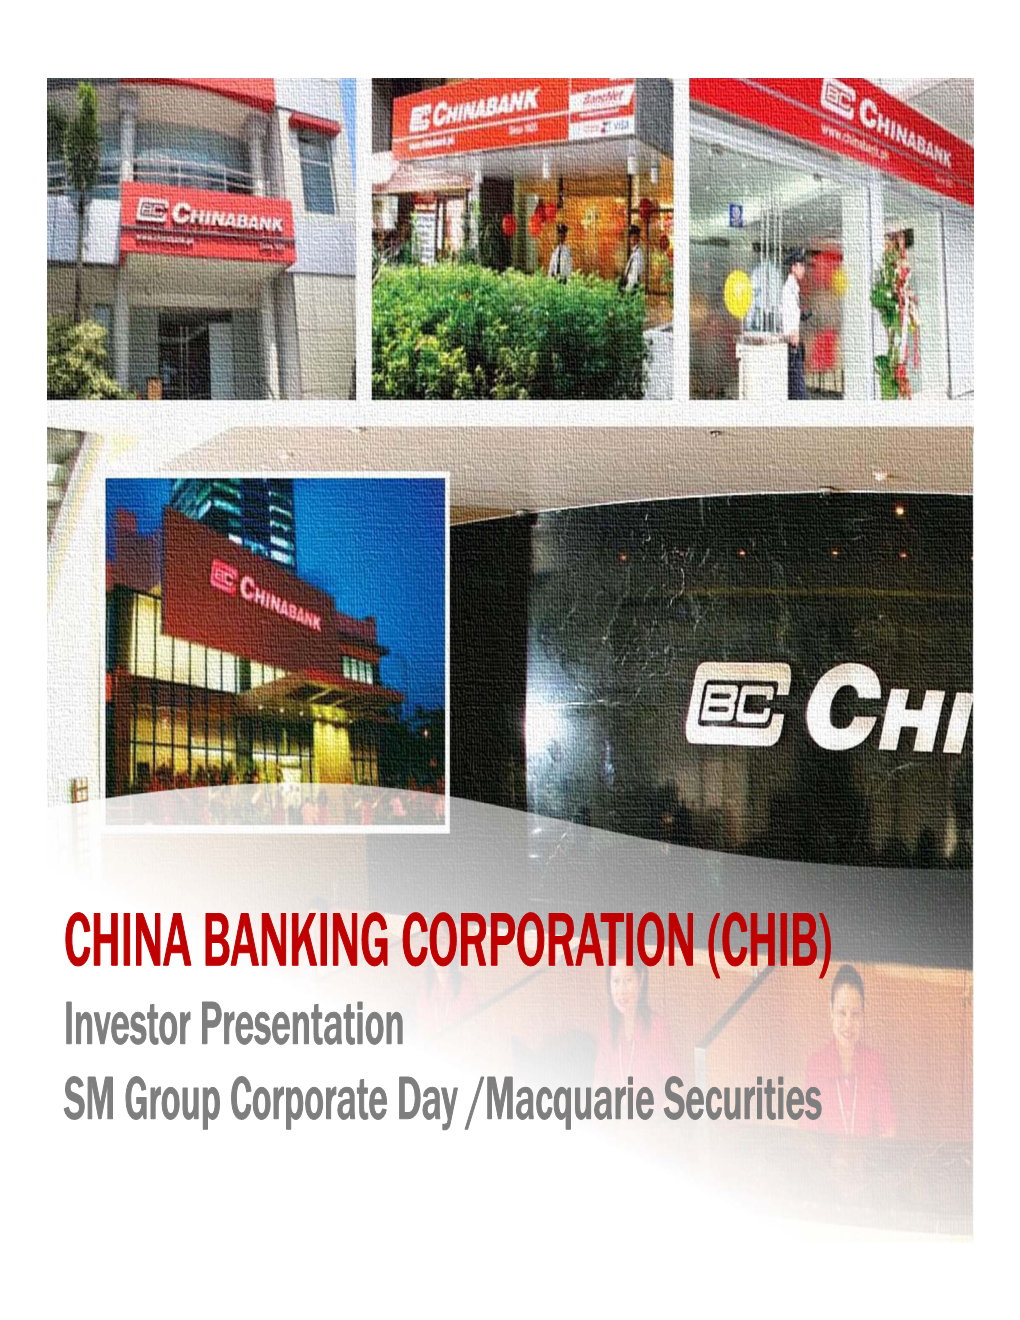 CHINA BANKING CORPORATION (CHIB) Investor Presentation SM Group Corporate Day /Macquarie Securities the Economic Backdrop